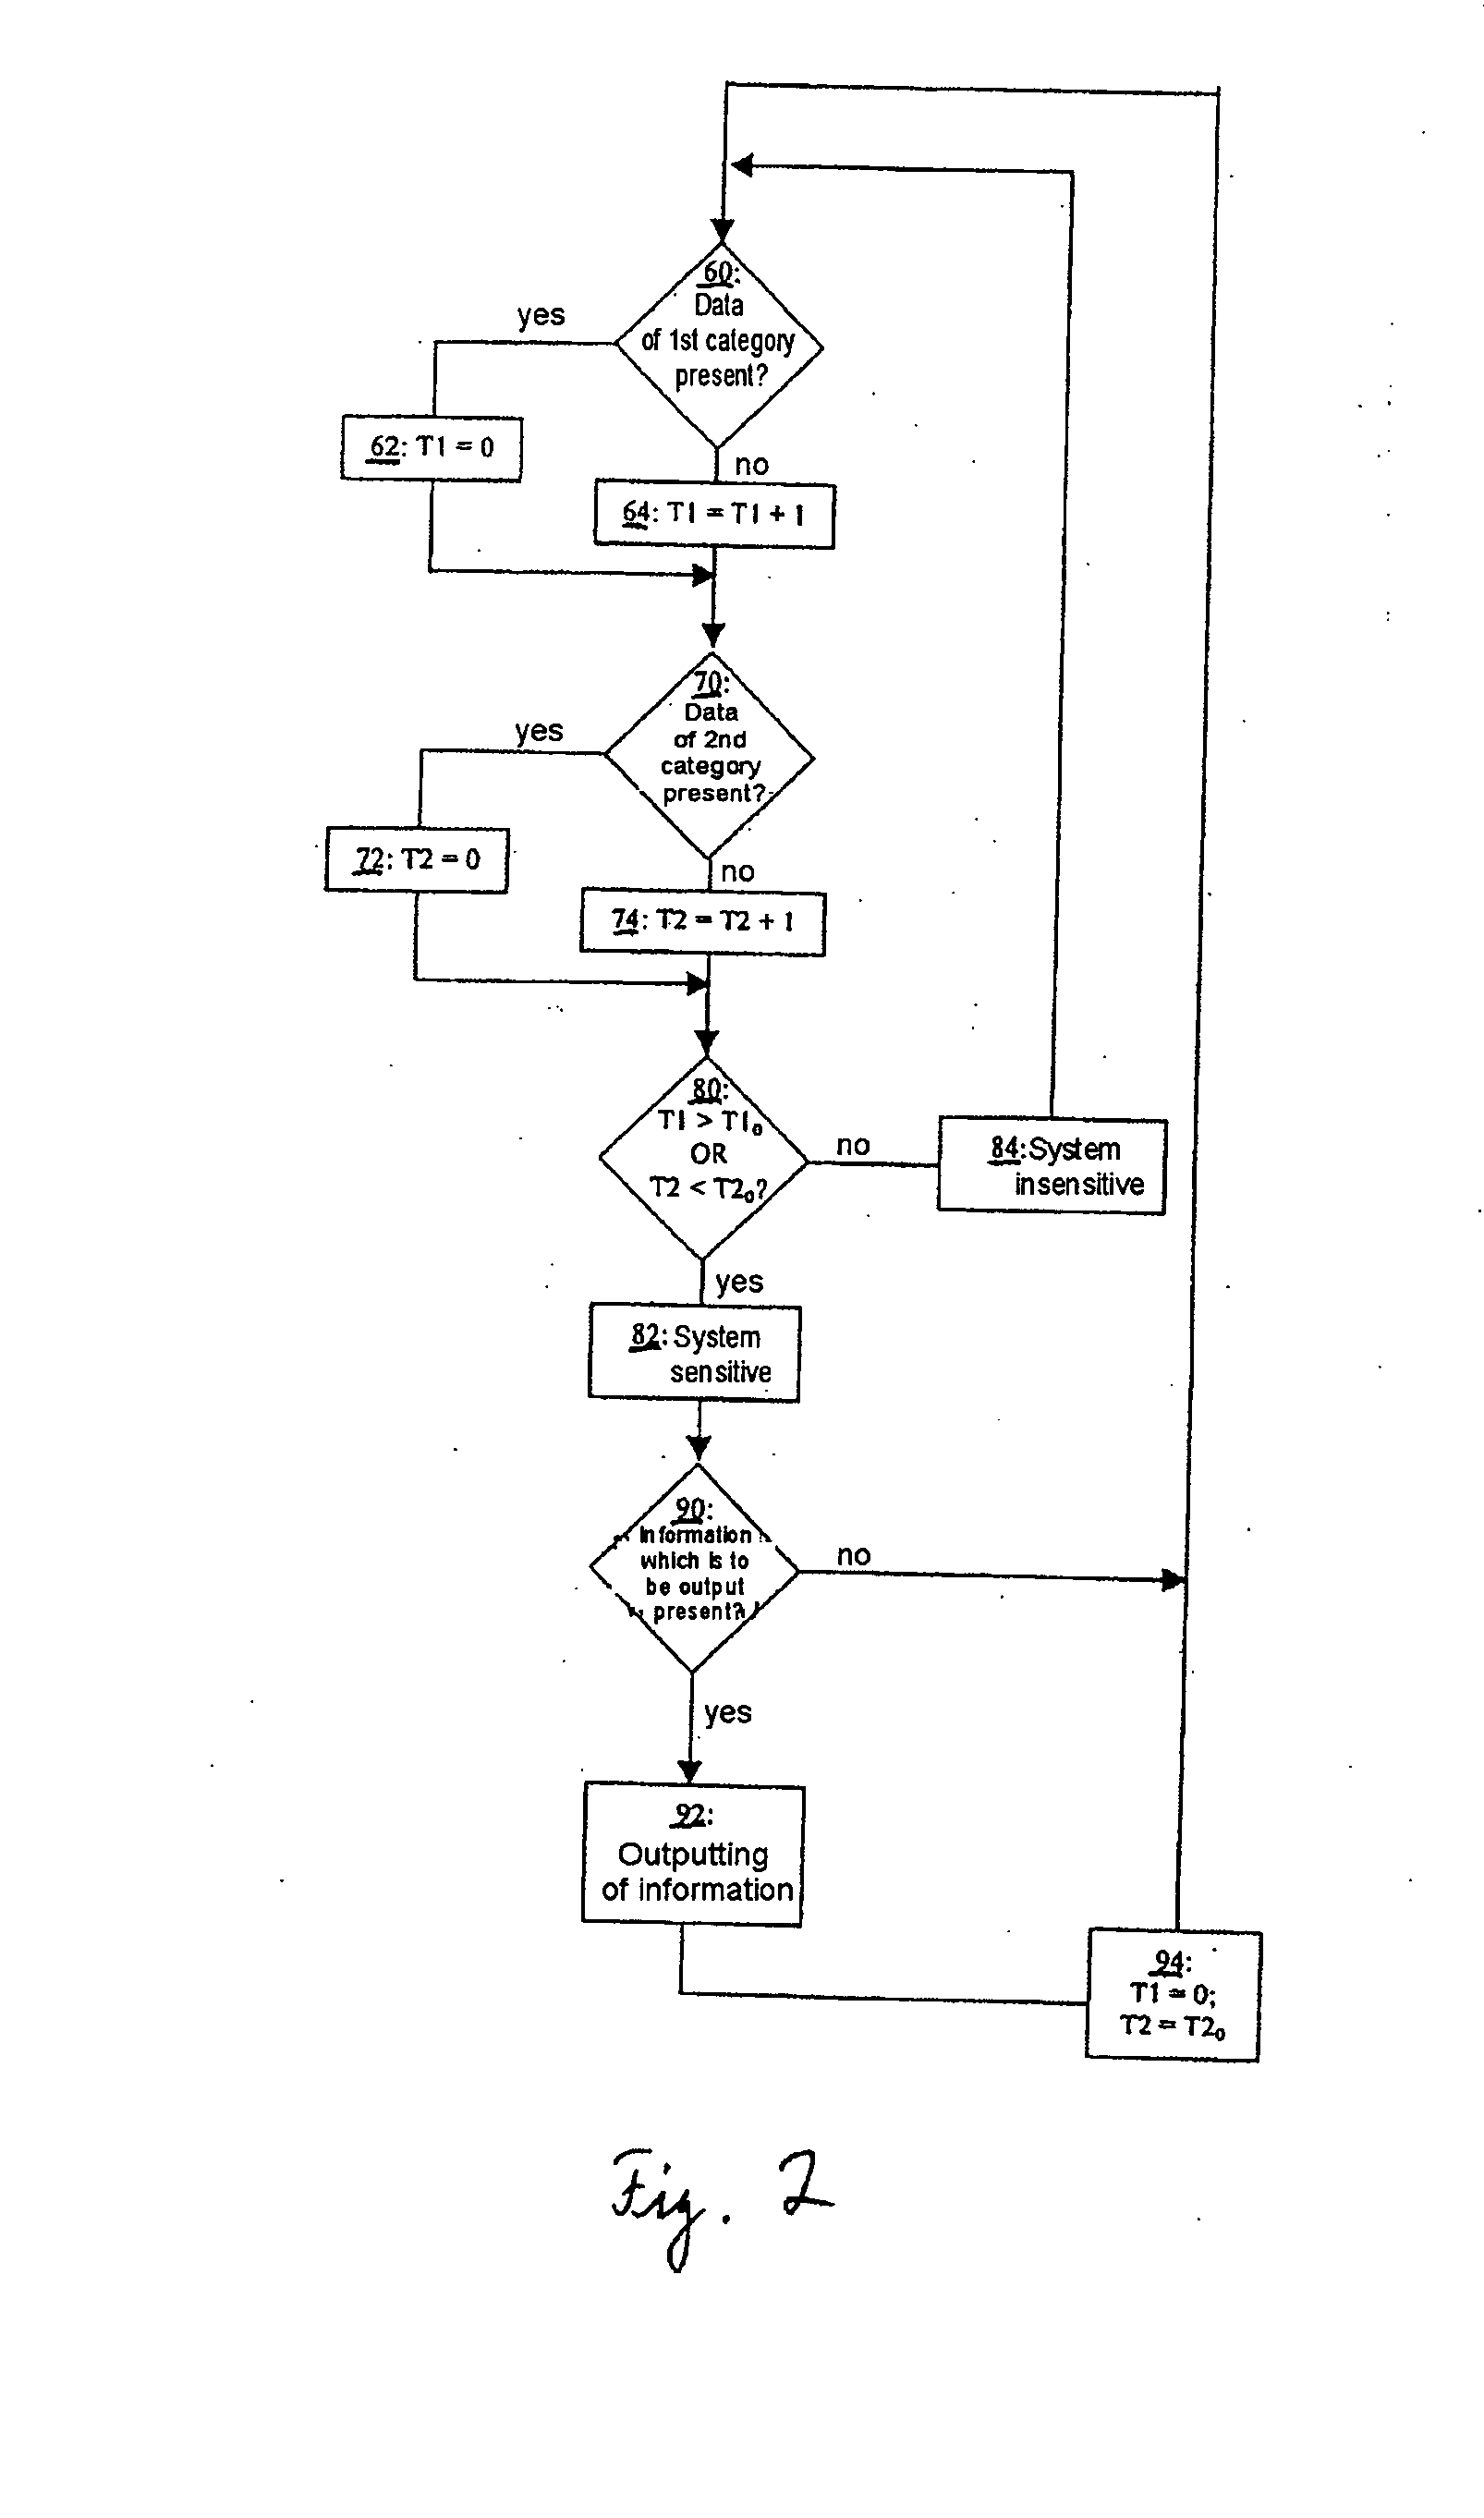 Information system in a motor vehicle with driving-style-dependent production of information to be outputted